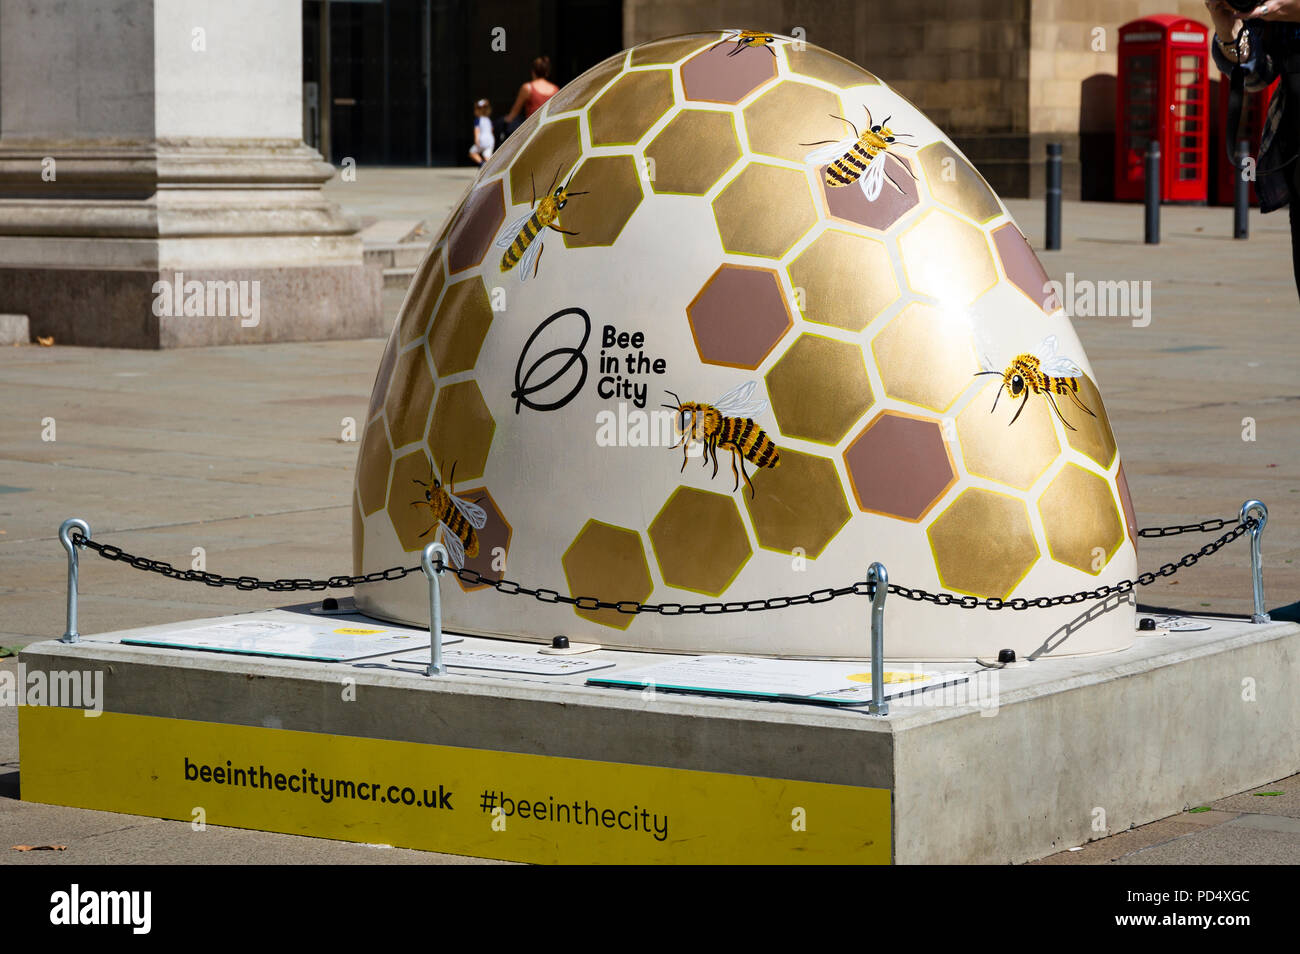 Buzzi - Lizzie Rose Chapman. Bee in the City, public art event in the City of Manchester. Over 100 bees on a free family fun trail. Stock Photo